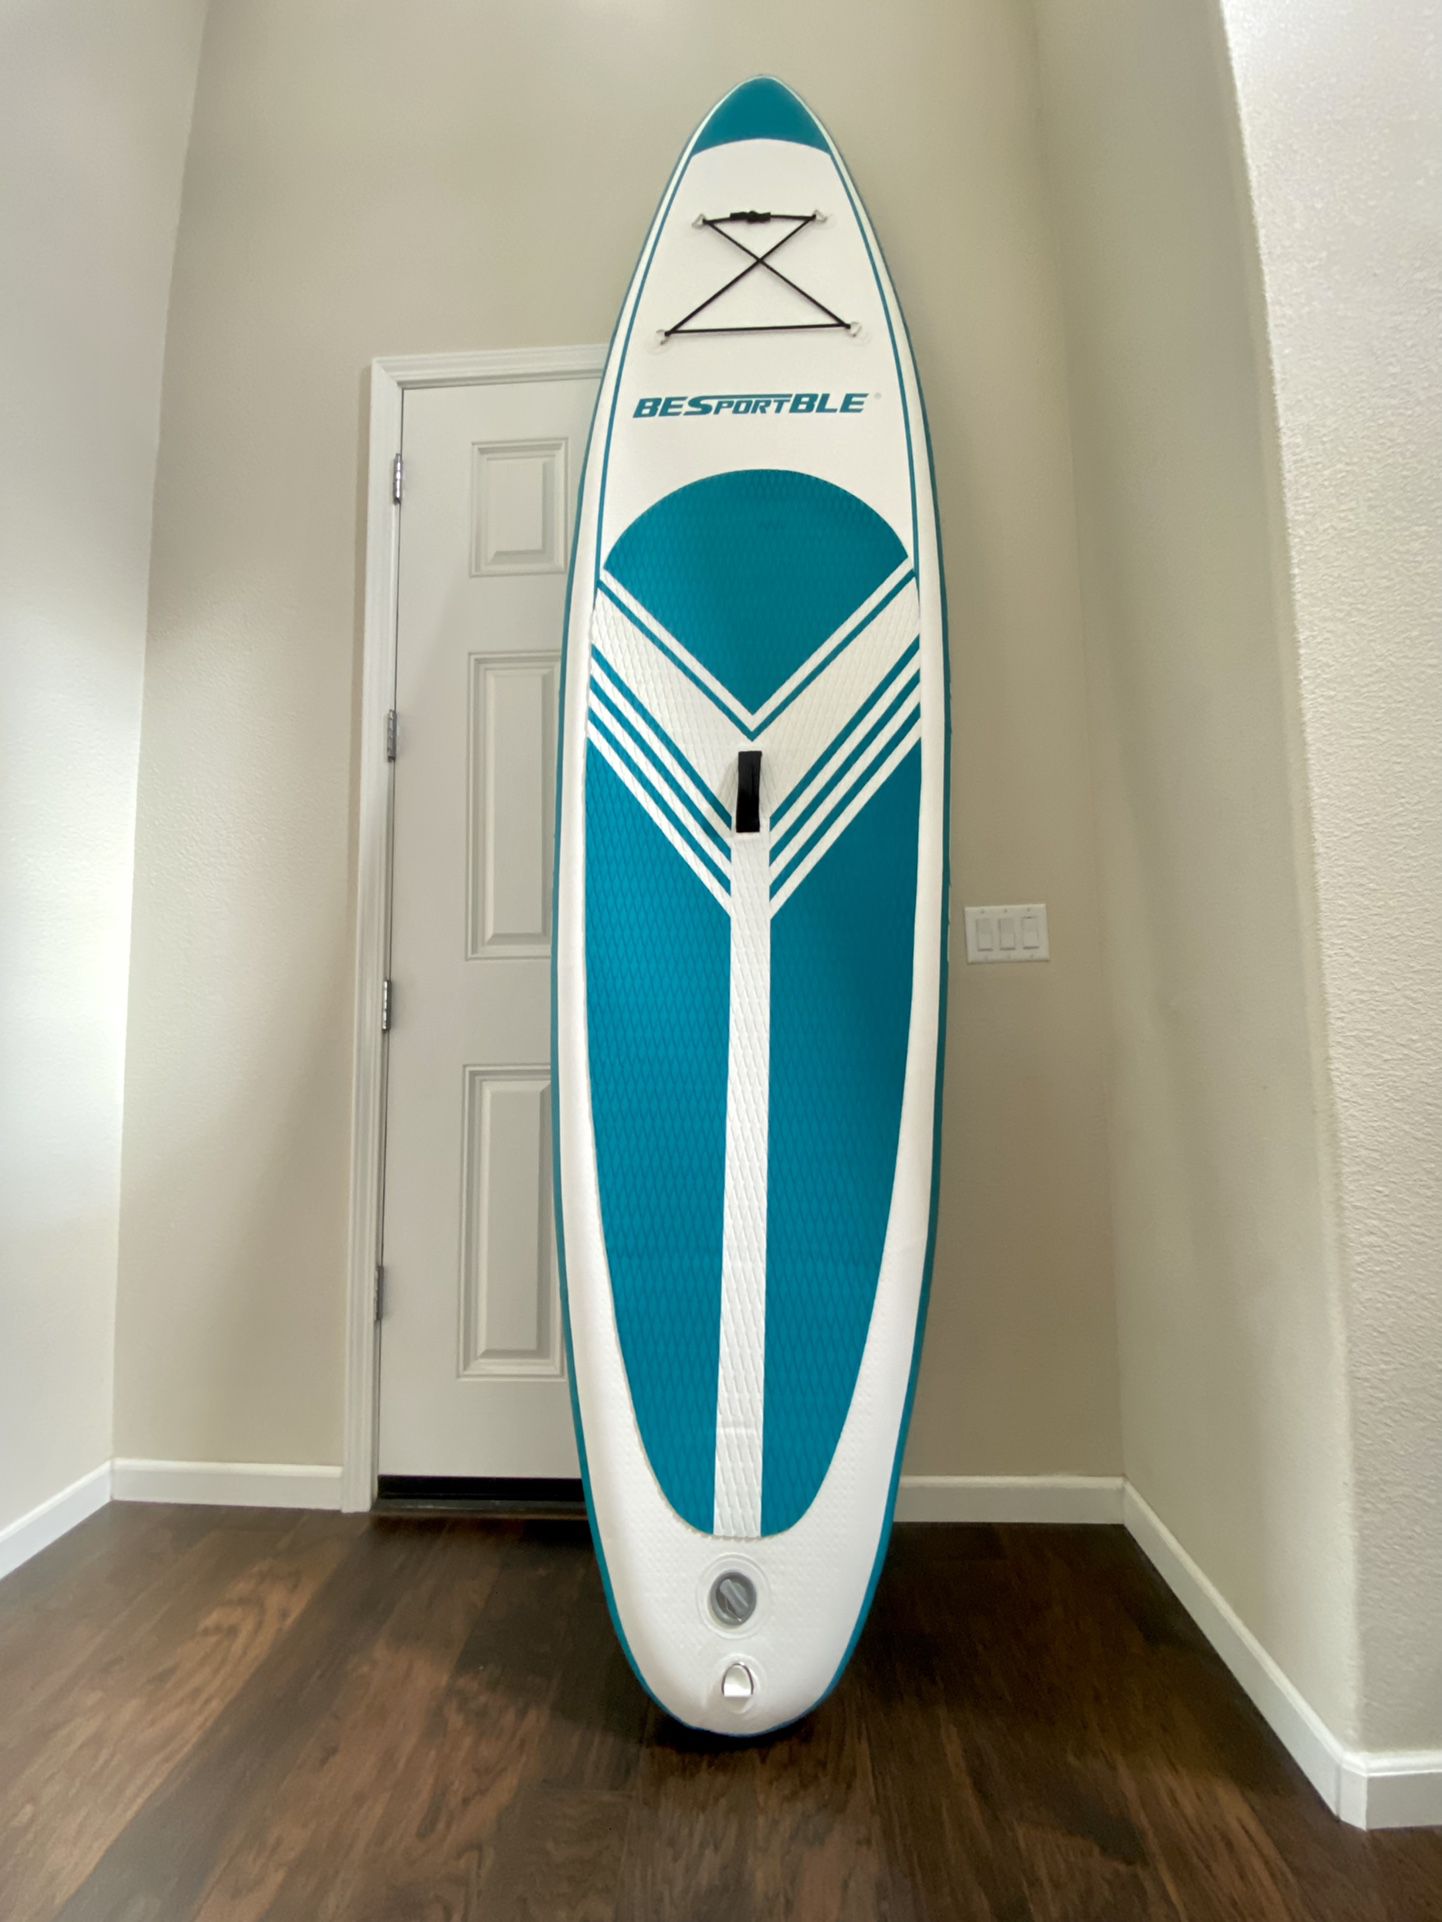 BRAND NEW—10FT PADDLE BOARD W/ COMPLETE ACCESSORIES & AIR PUMP/ BACKPACK/ 330lbs max weight cap.